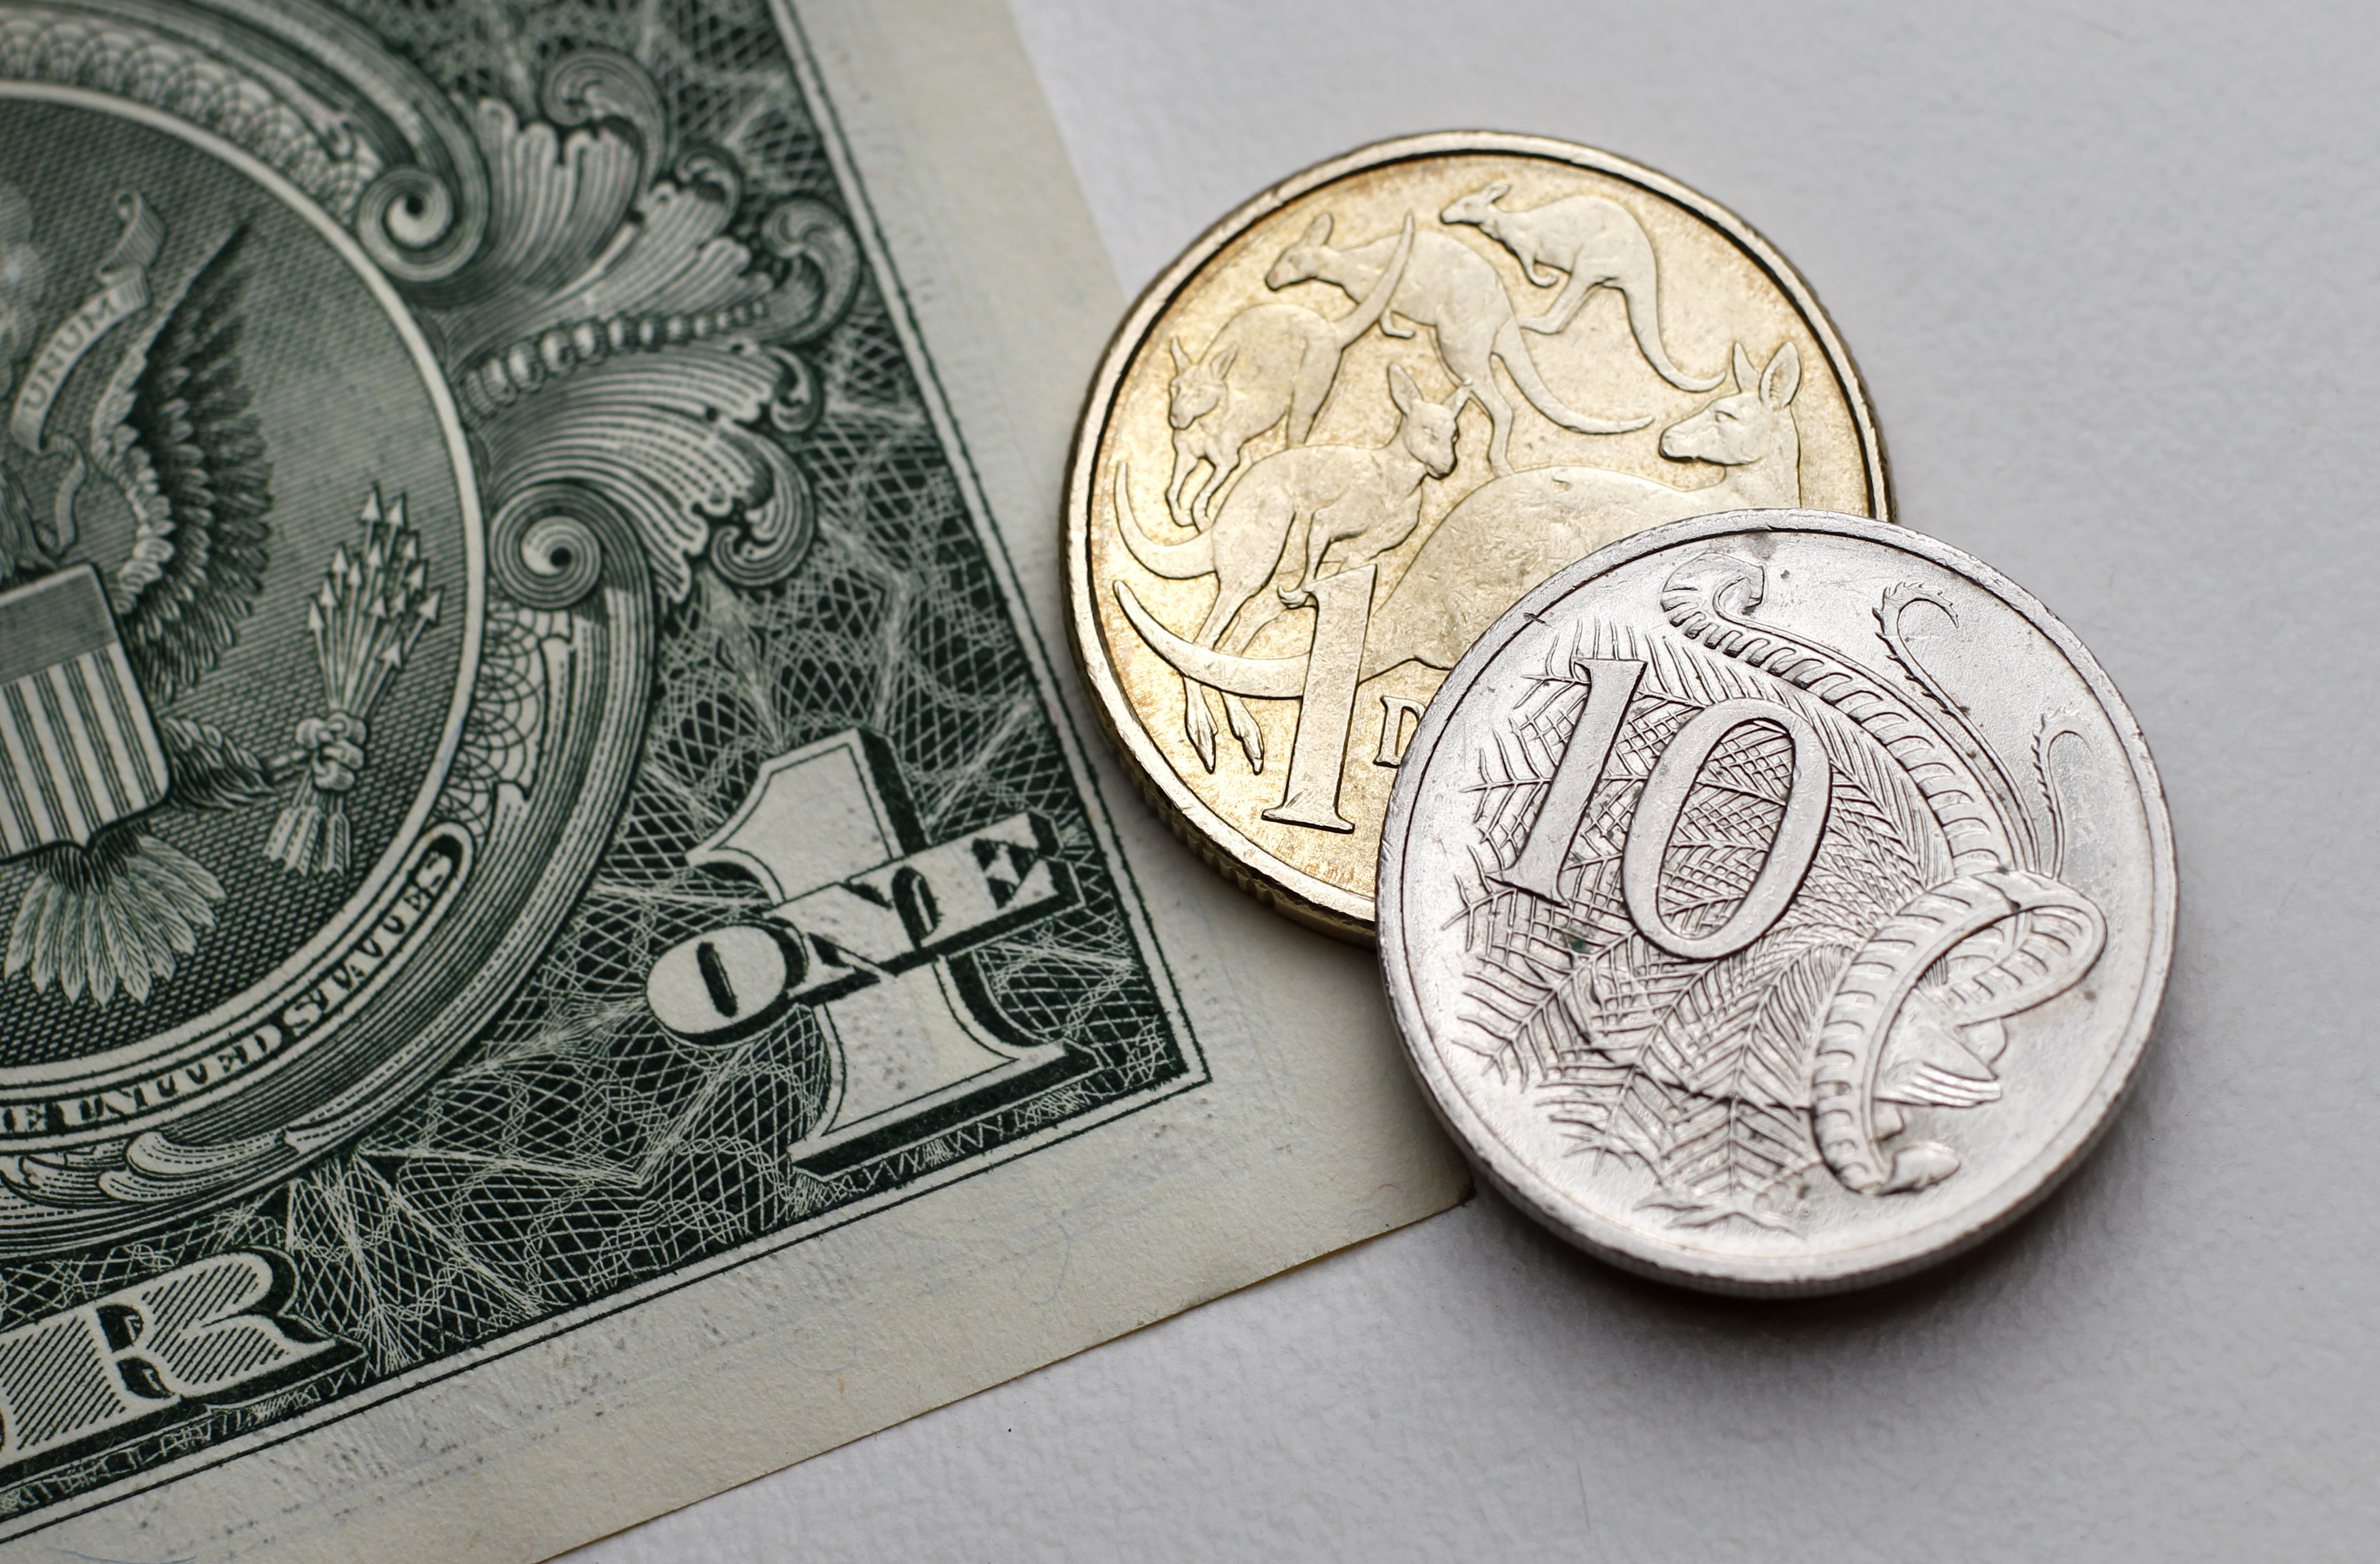 Photo illustration shows one dollar and 10 cents in Australian currency sitting atop a U.S. one dollar note in Sydney